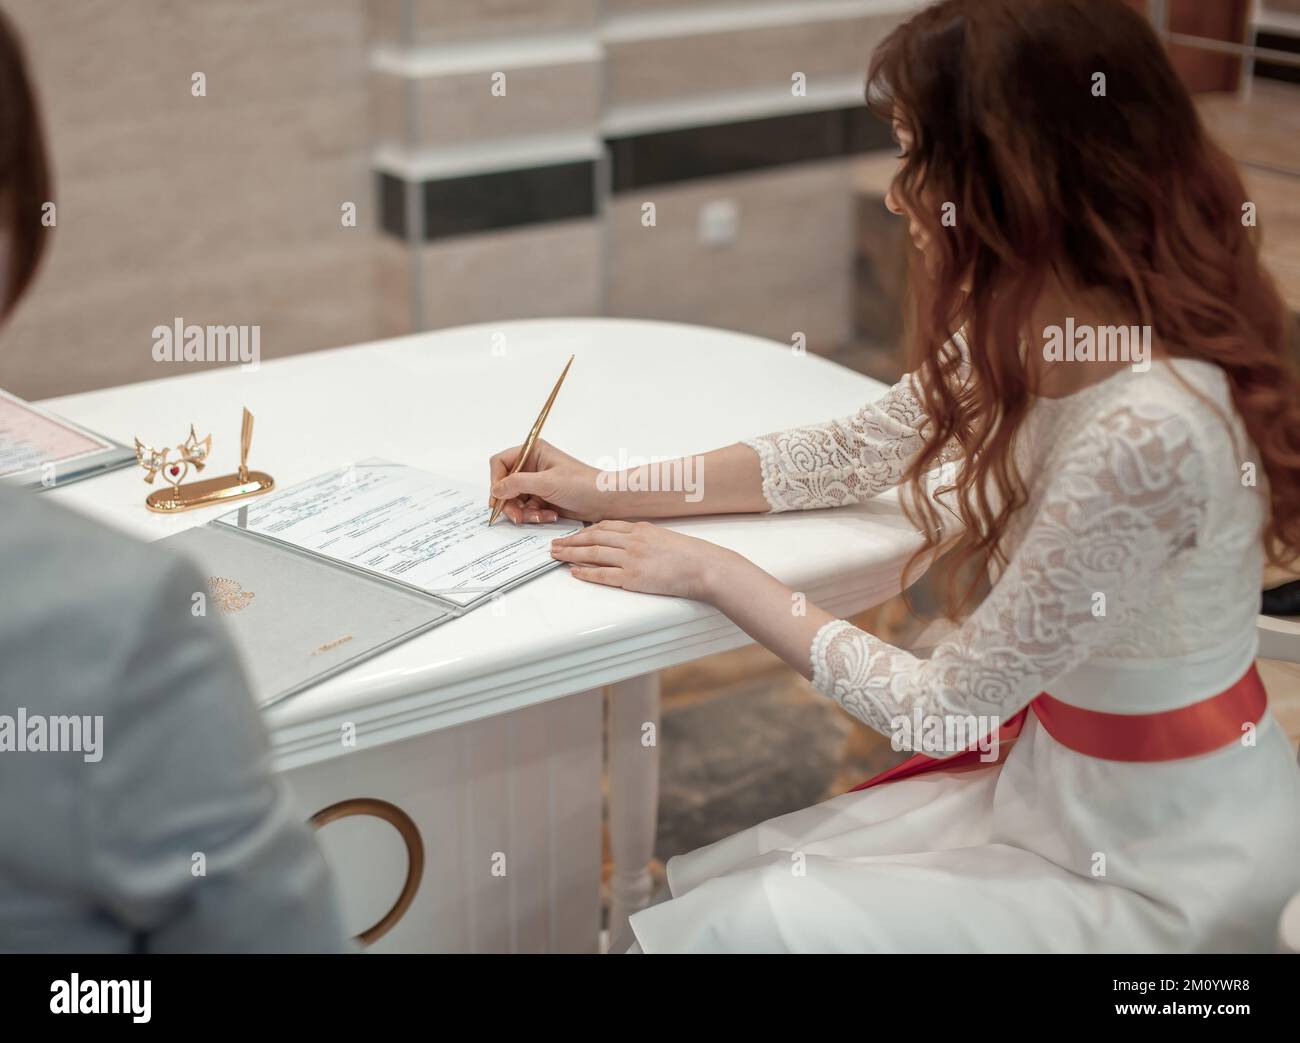 bride signing paper in white dress Stock Photo